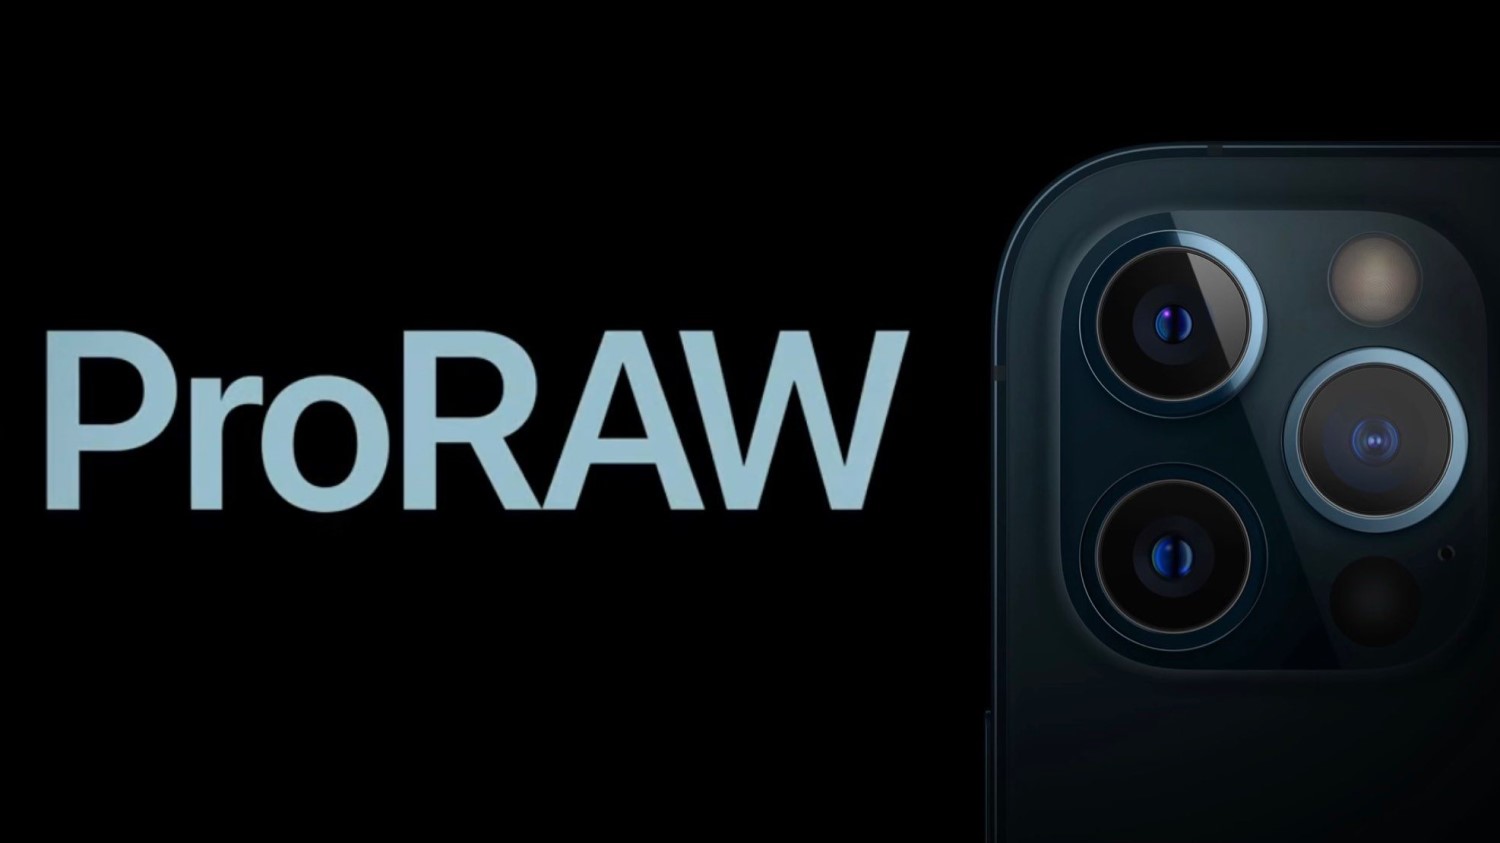 How to Enable ProRAW Support on iPhone 12 Pro and iPhone 12 Pro Max